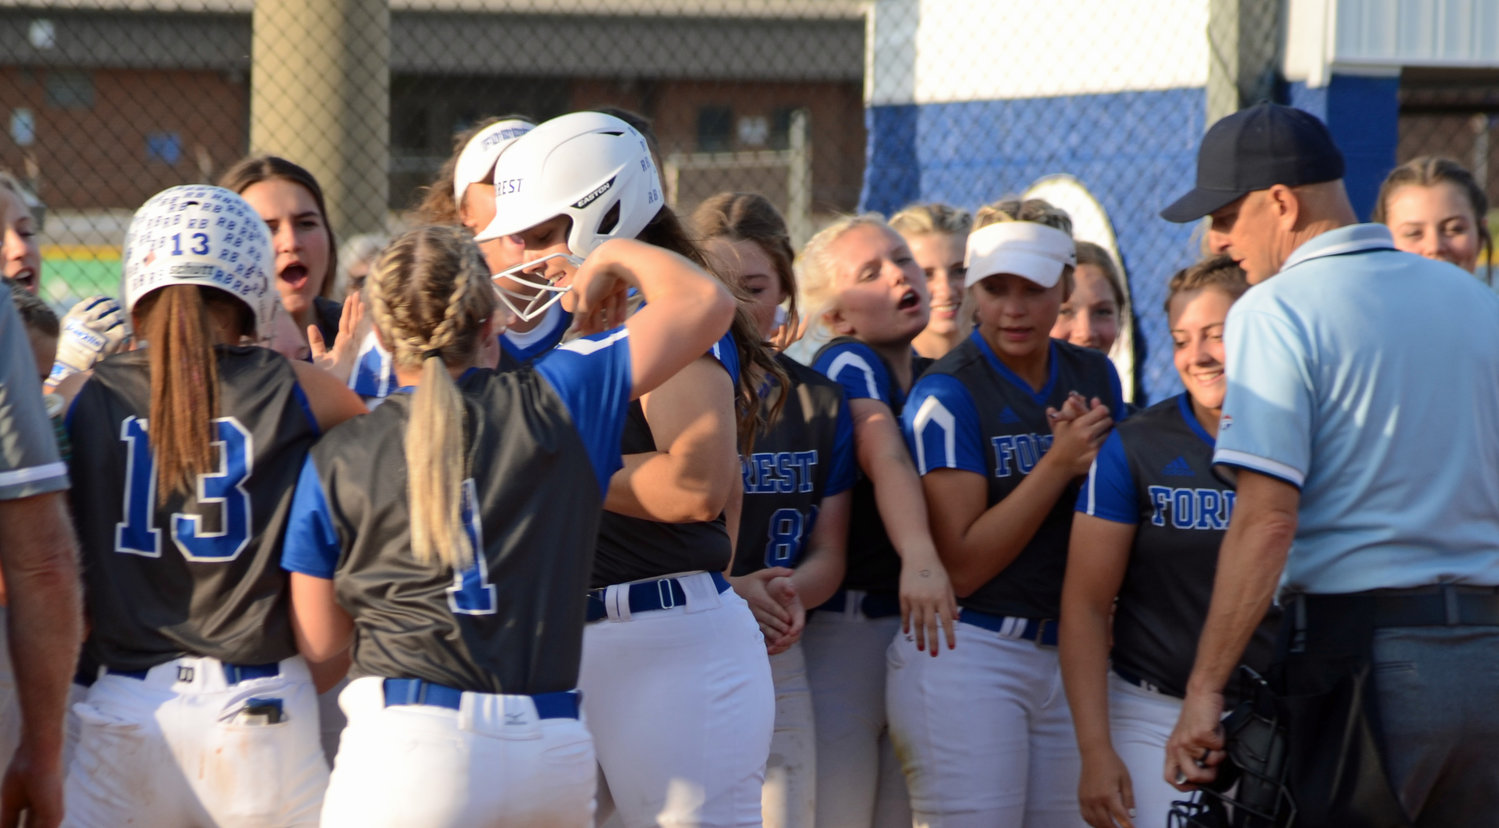 Sarah King is greeted by her teammates at home plate after bashing a two-run homerun in the bottom of the fourth inning.